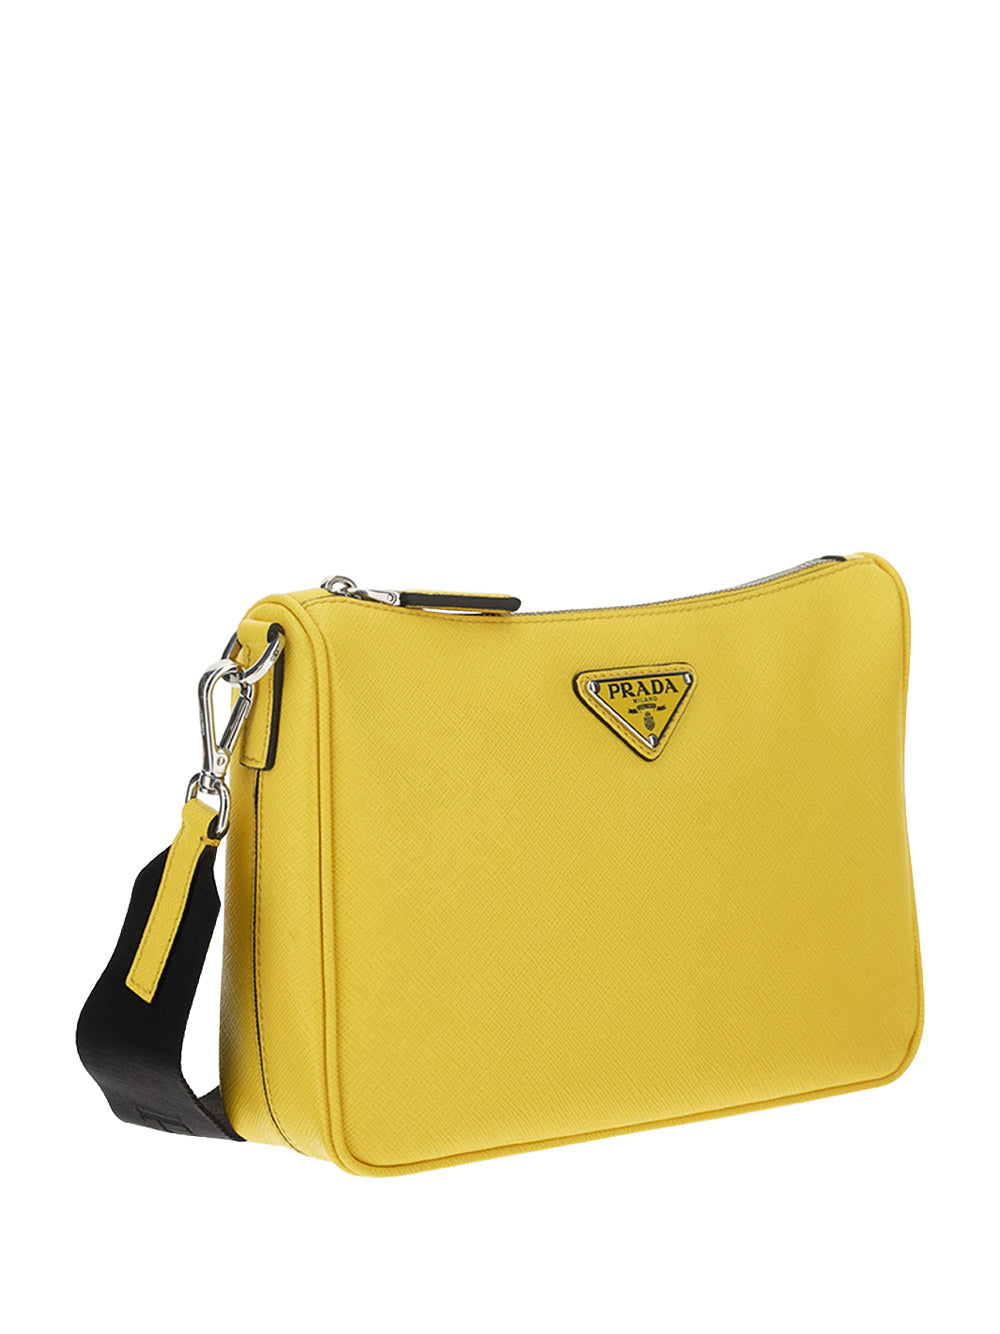 Saffiano Leather Shoulder Bag - Bright Yellow N